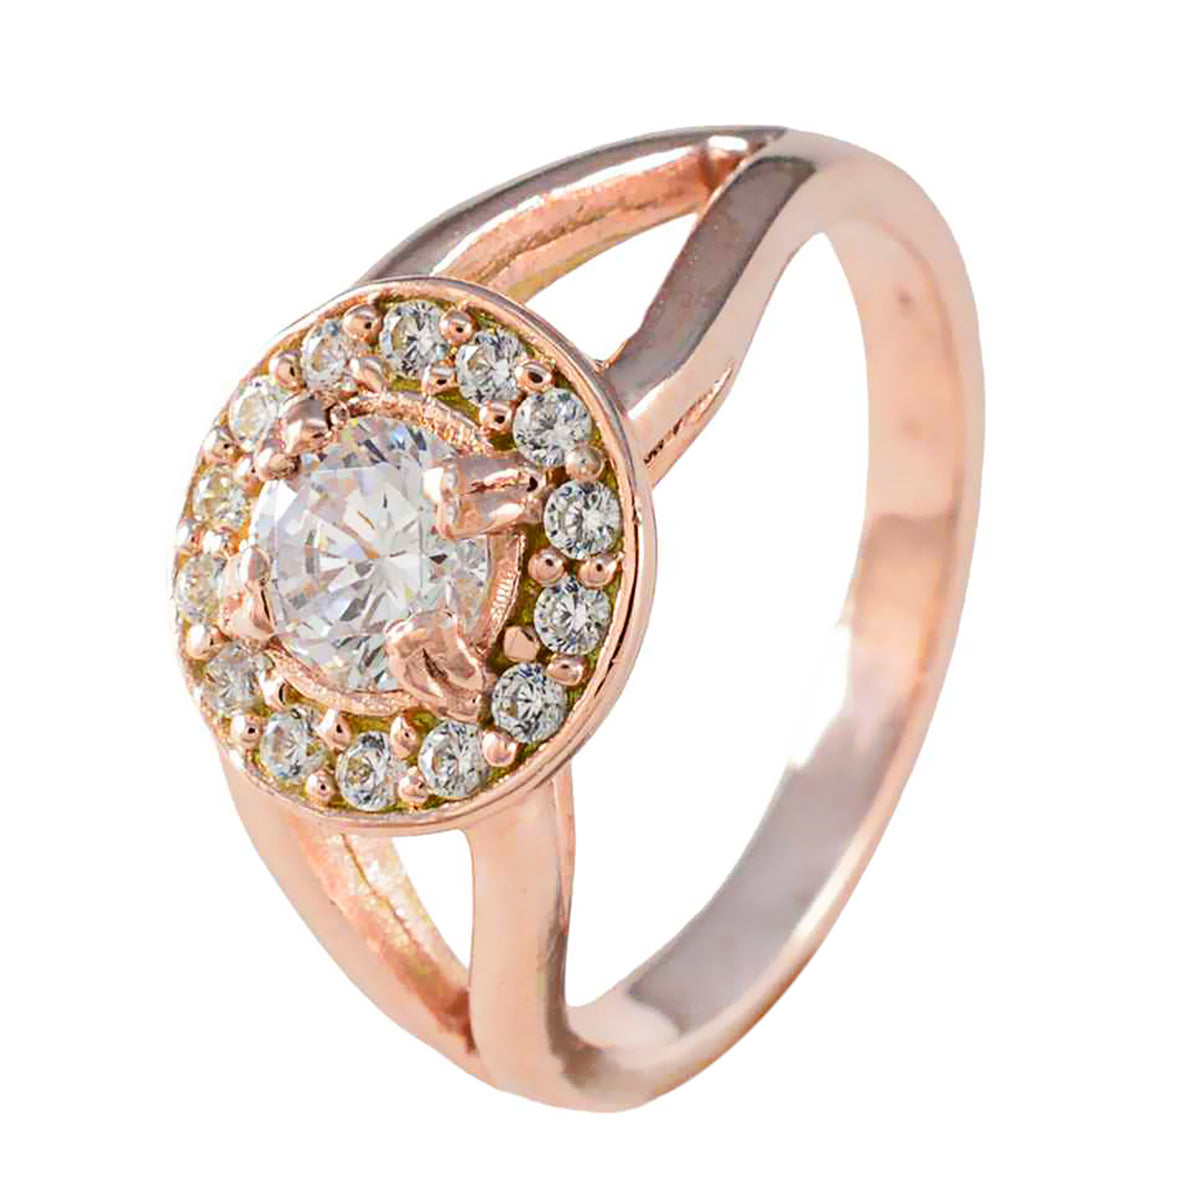 Riyo Classical Silver Ring With Rose Gold Plating White CZ Stone Round Shape Prong Setting Handmade Jewelry Cocktail Ring